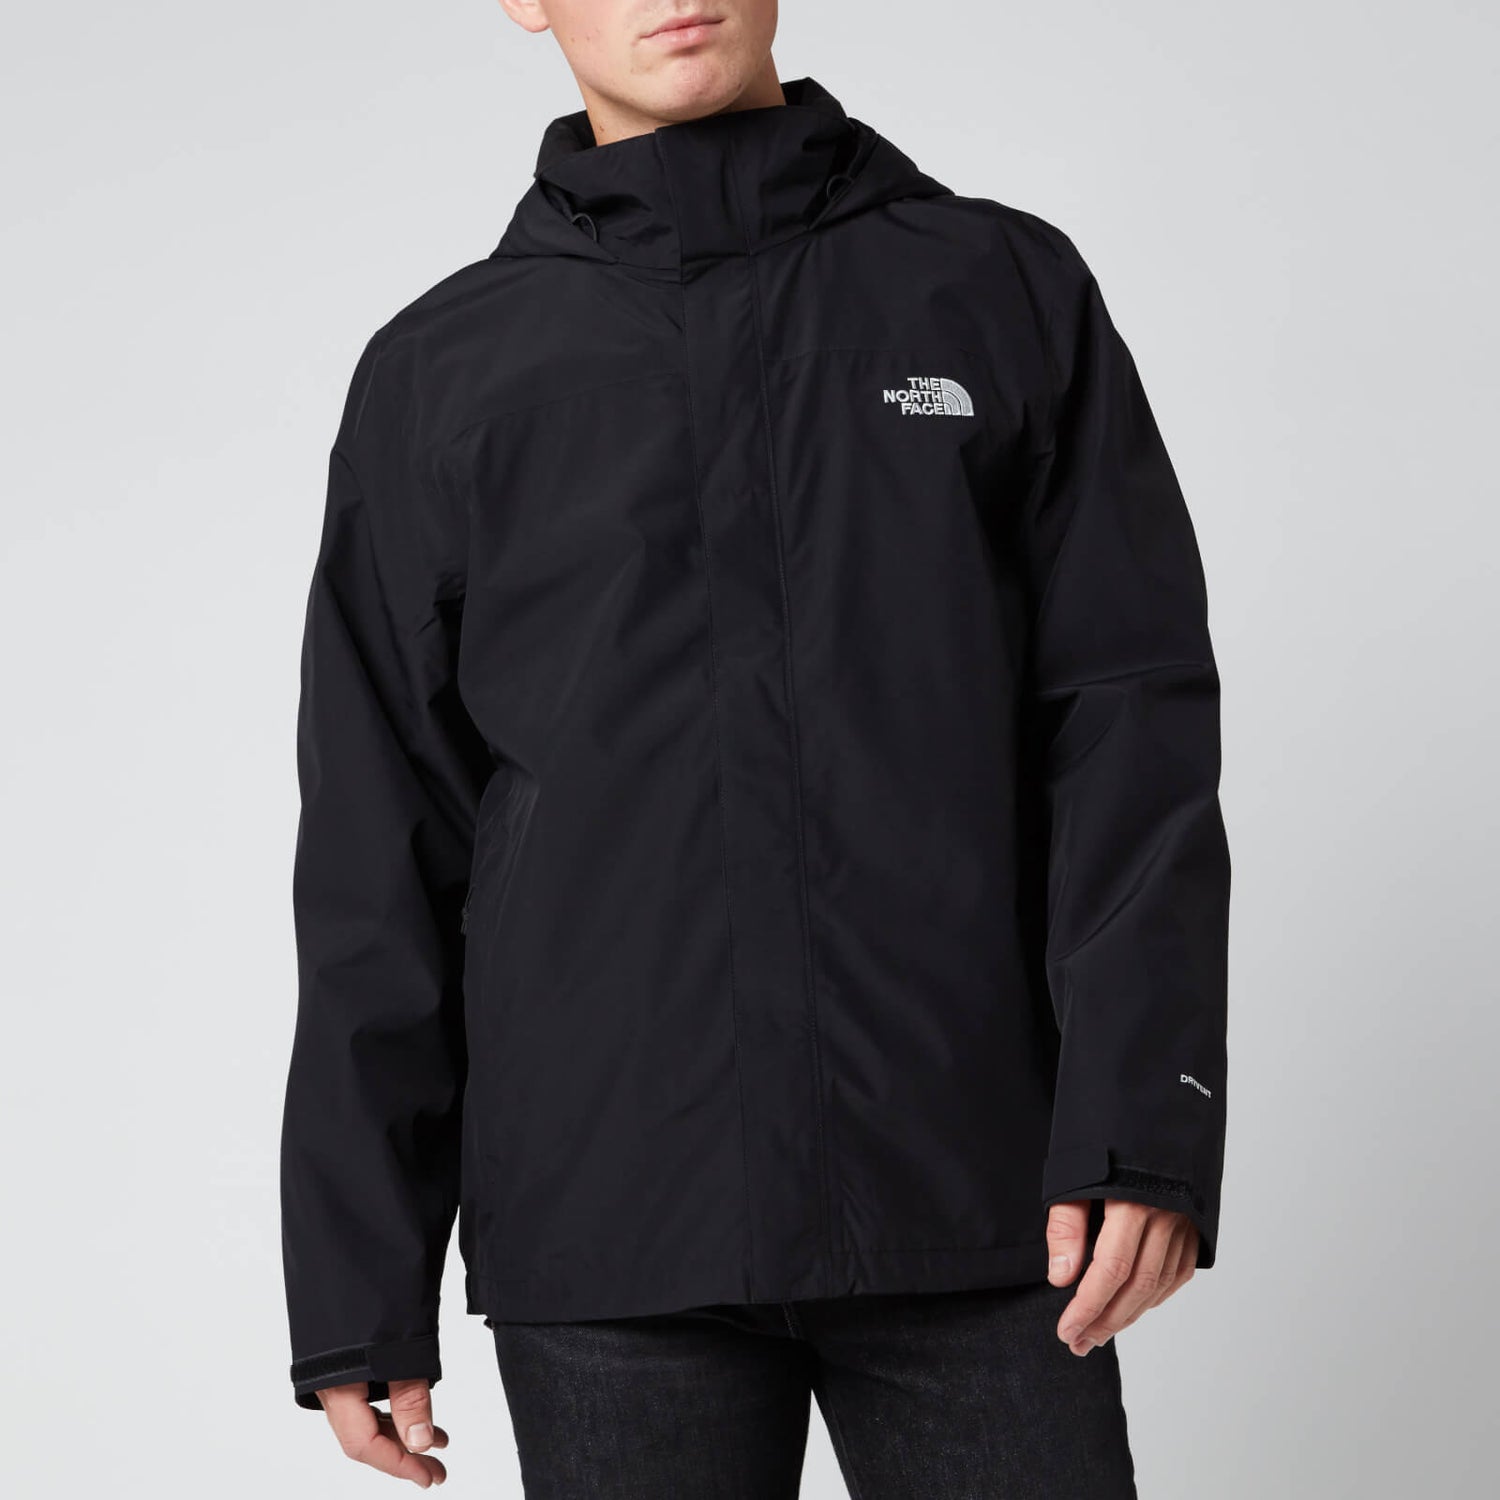 The North Face Men's Sangro Jacket - TNF Black - Free UK Delivery Available